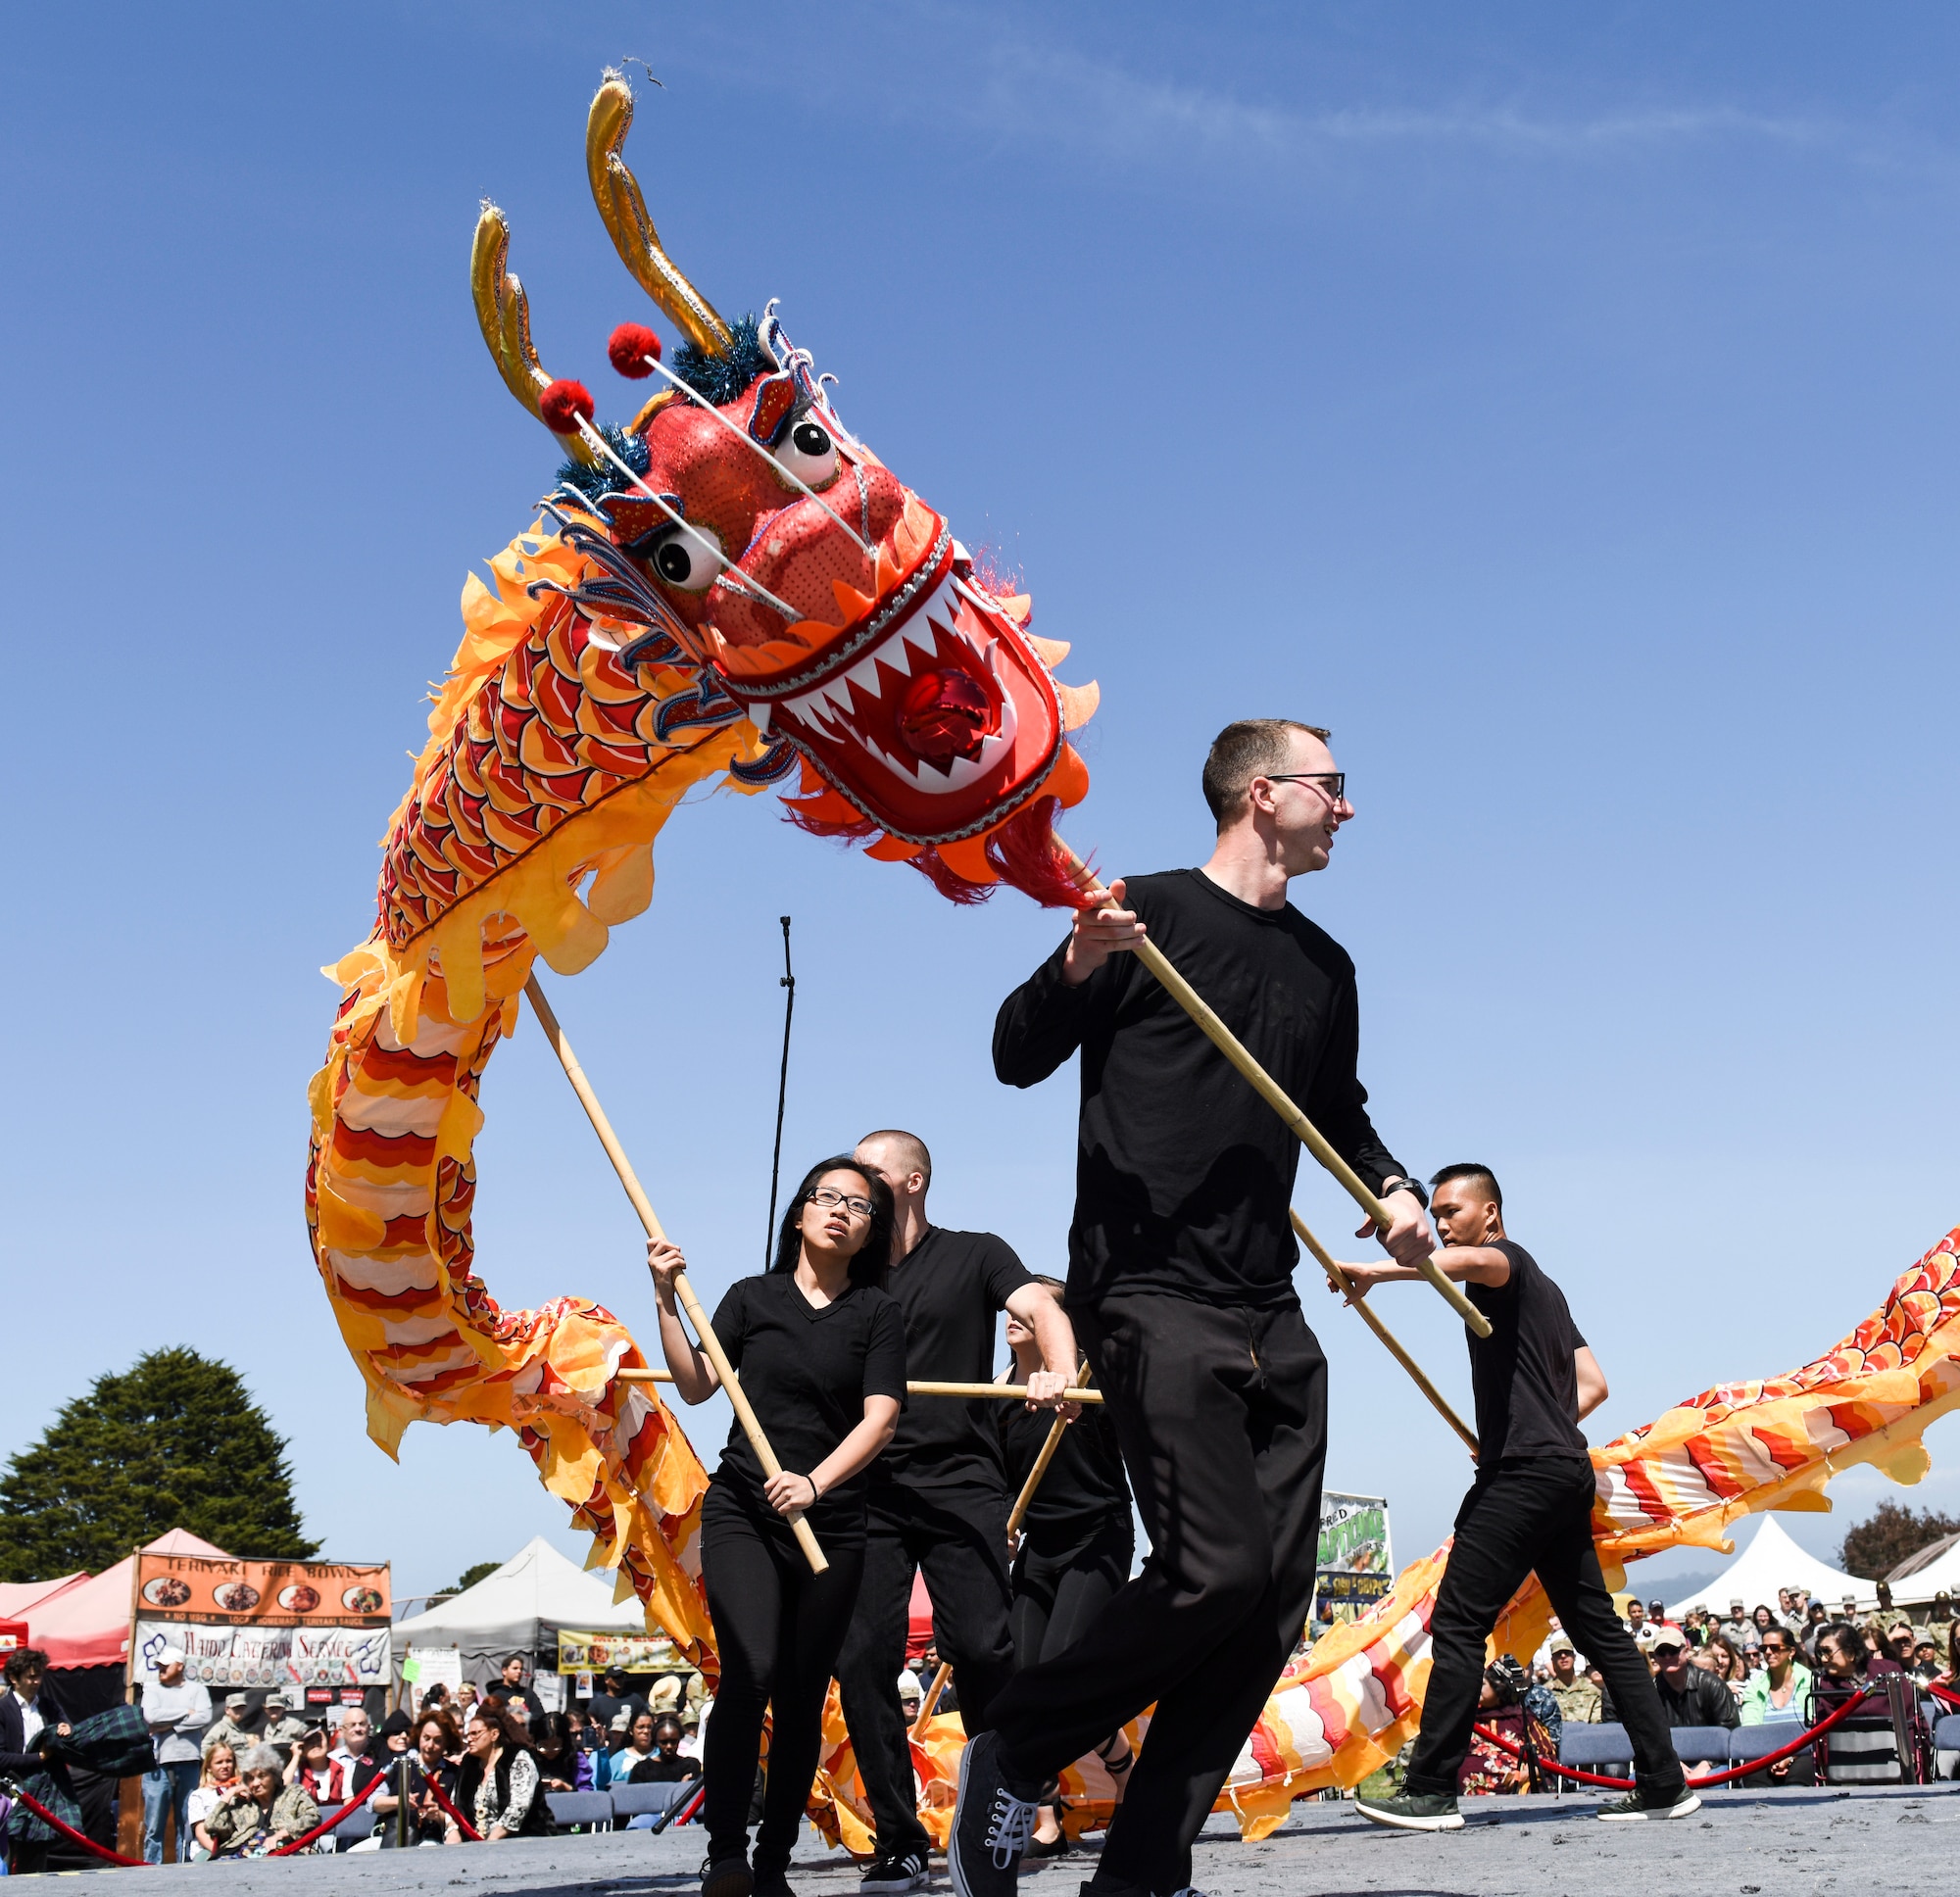 Students perform the Chinese Dragon Dance during the Defense Language Institute Foreign Language Center Language Day at the Presideo of Monterey, California, May 11, 2018. The Chinese Dragon Dance kicks off Language Day each year.